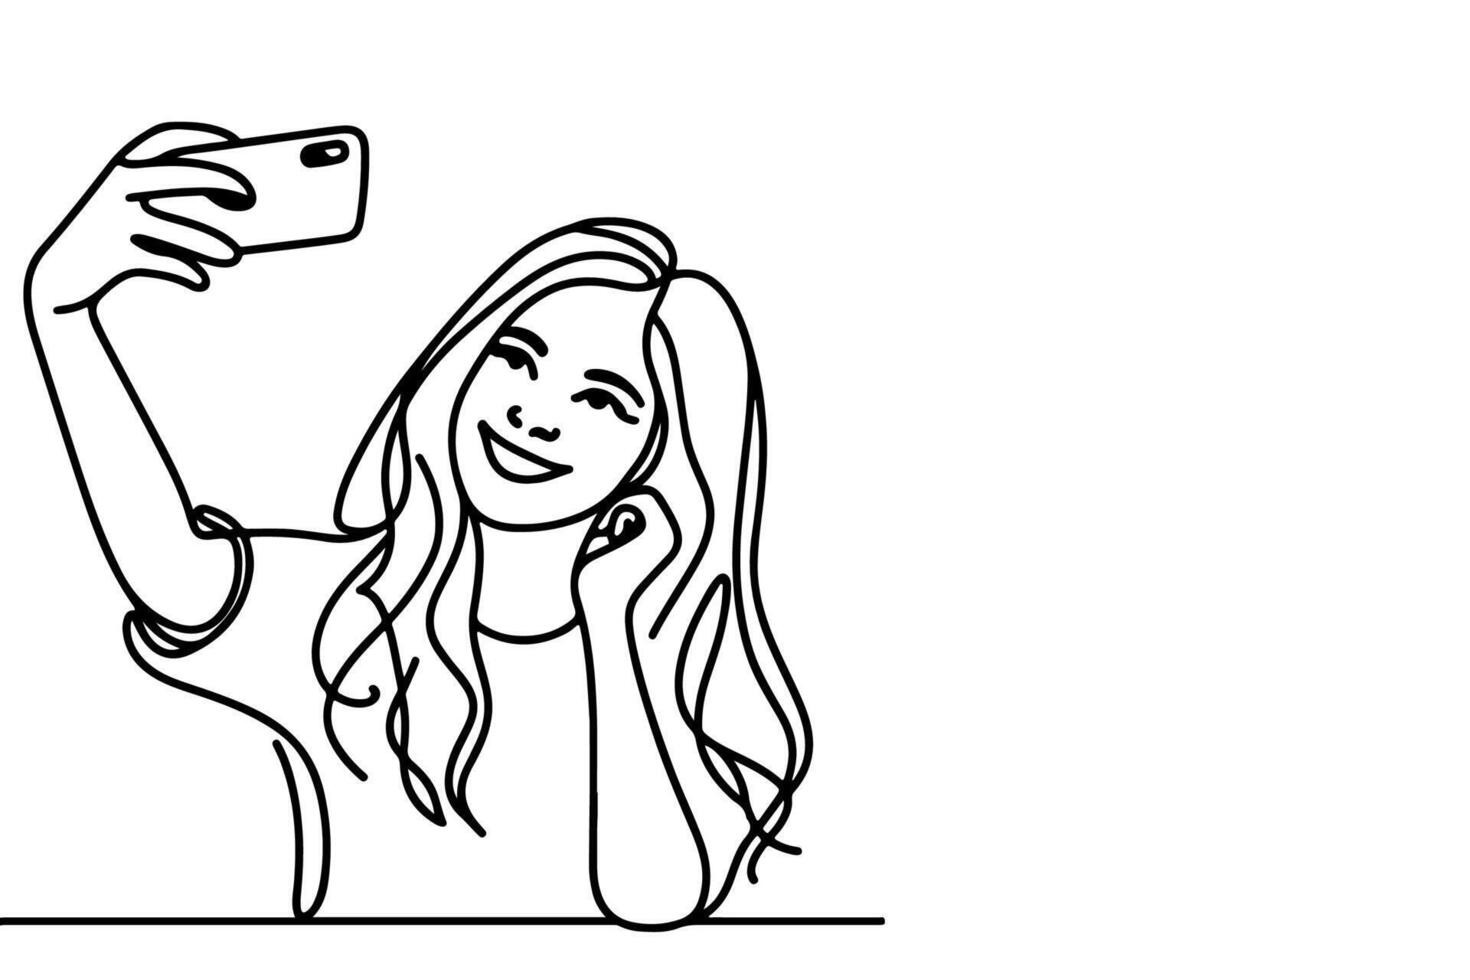 continuous one black line art drawing cheerful young girl holding smartphone to taking acting selfie or video call through mobile phone outline doodle vector family travel concept